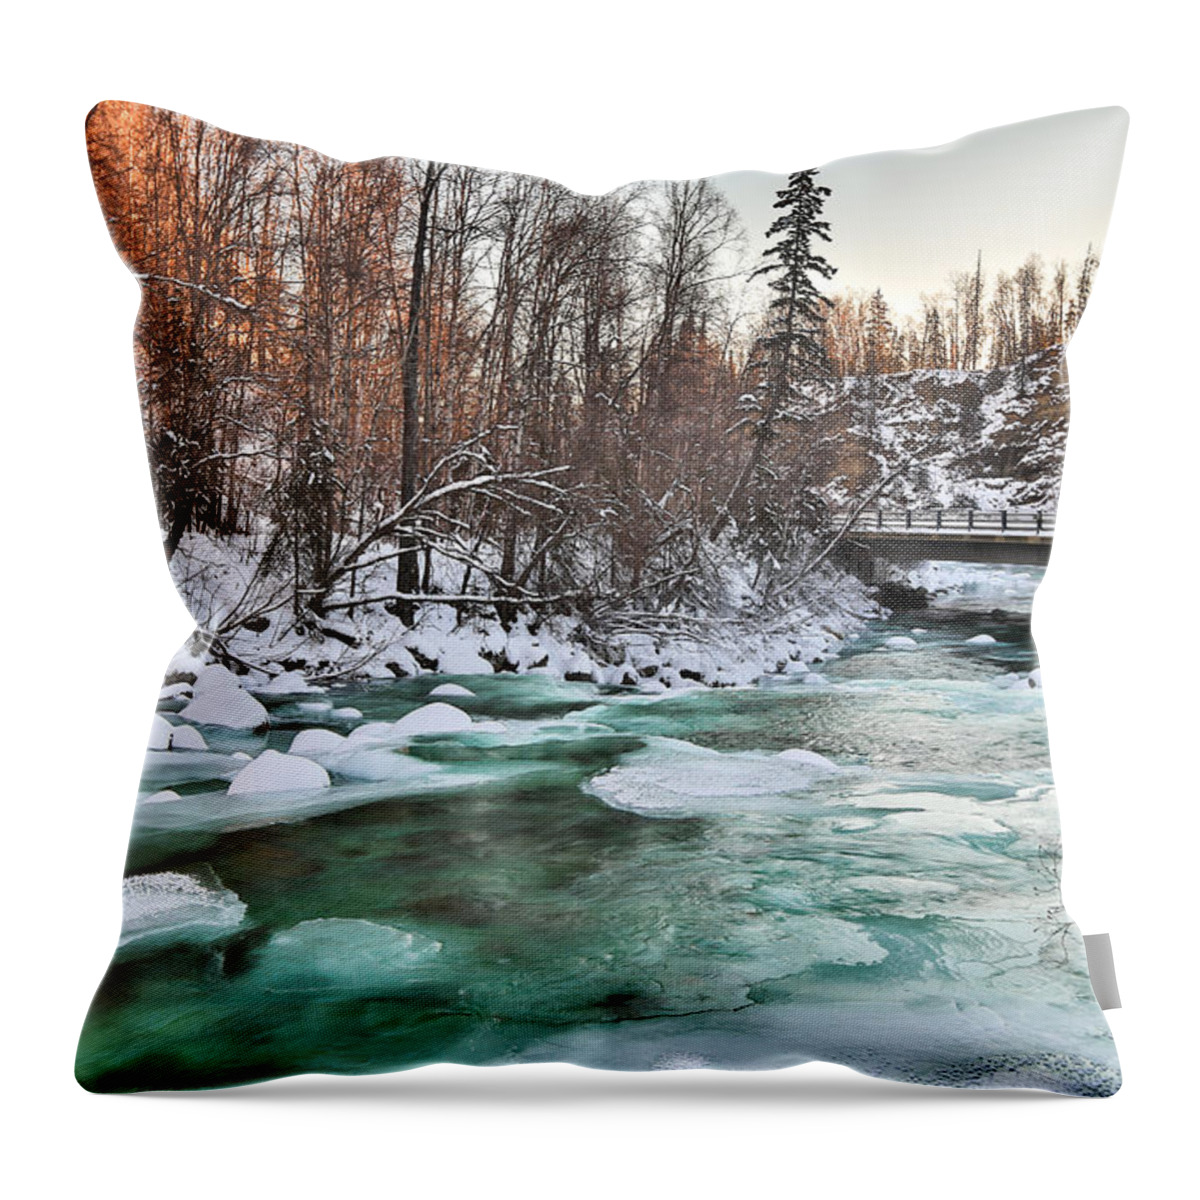 Sam Amato Photography Throw Pillow featuring the photograph Turquoise Winter River by Sam Amato